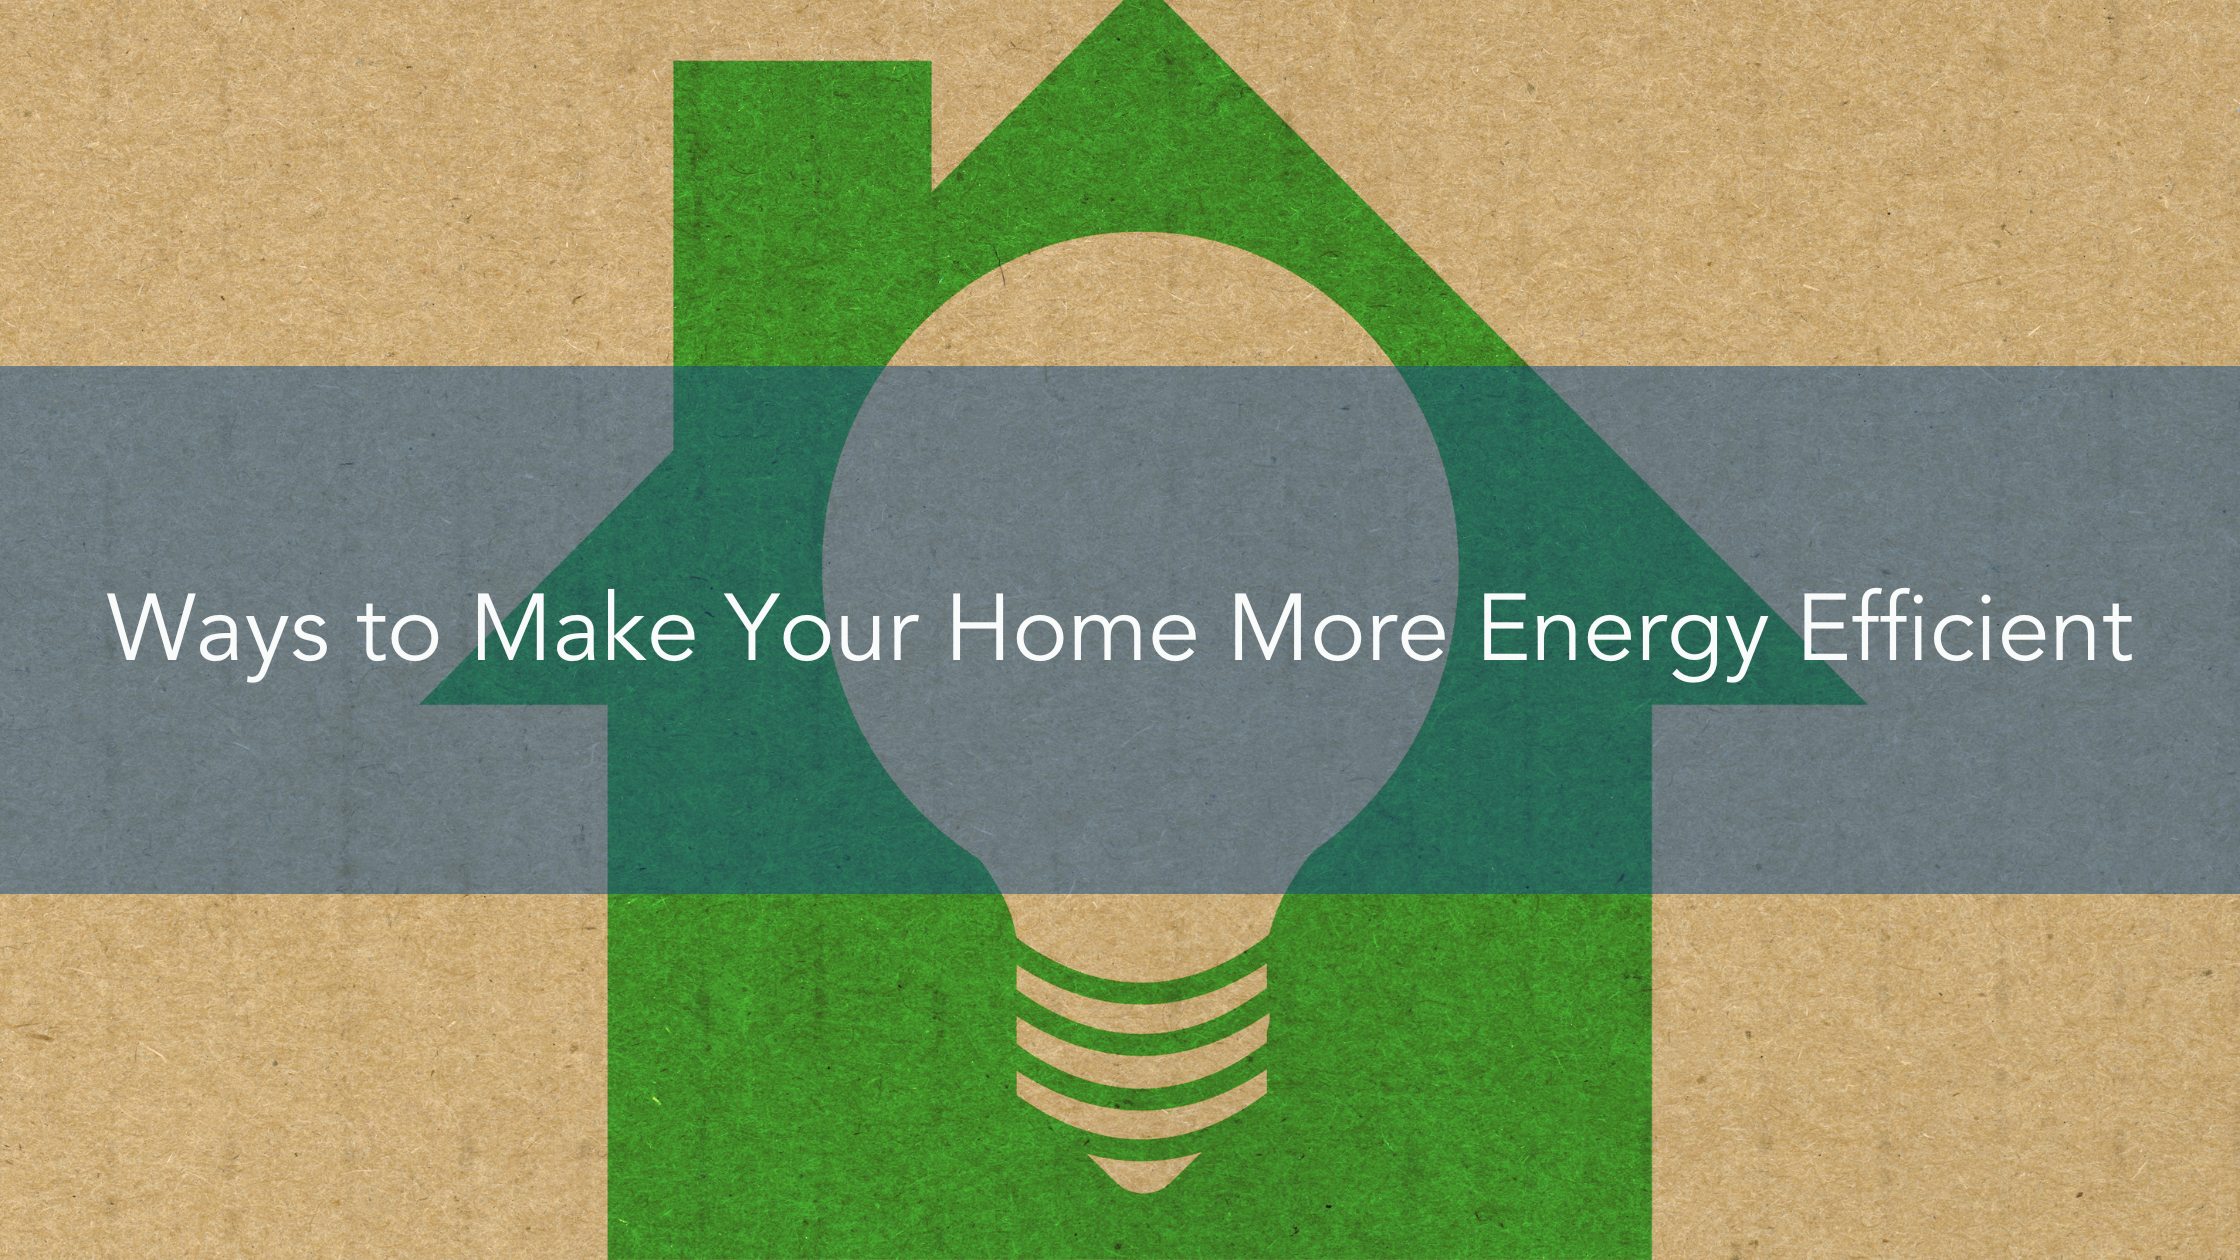 https://handymanconnection.com/wp-content/uploads/2022/10/Ways-to-Make-Your-Home-More-Energy-Efficient.png